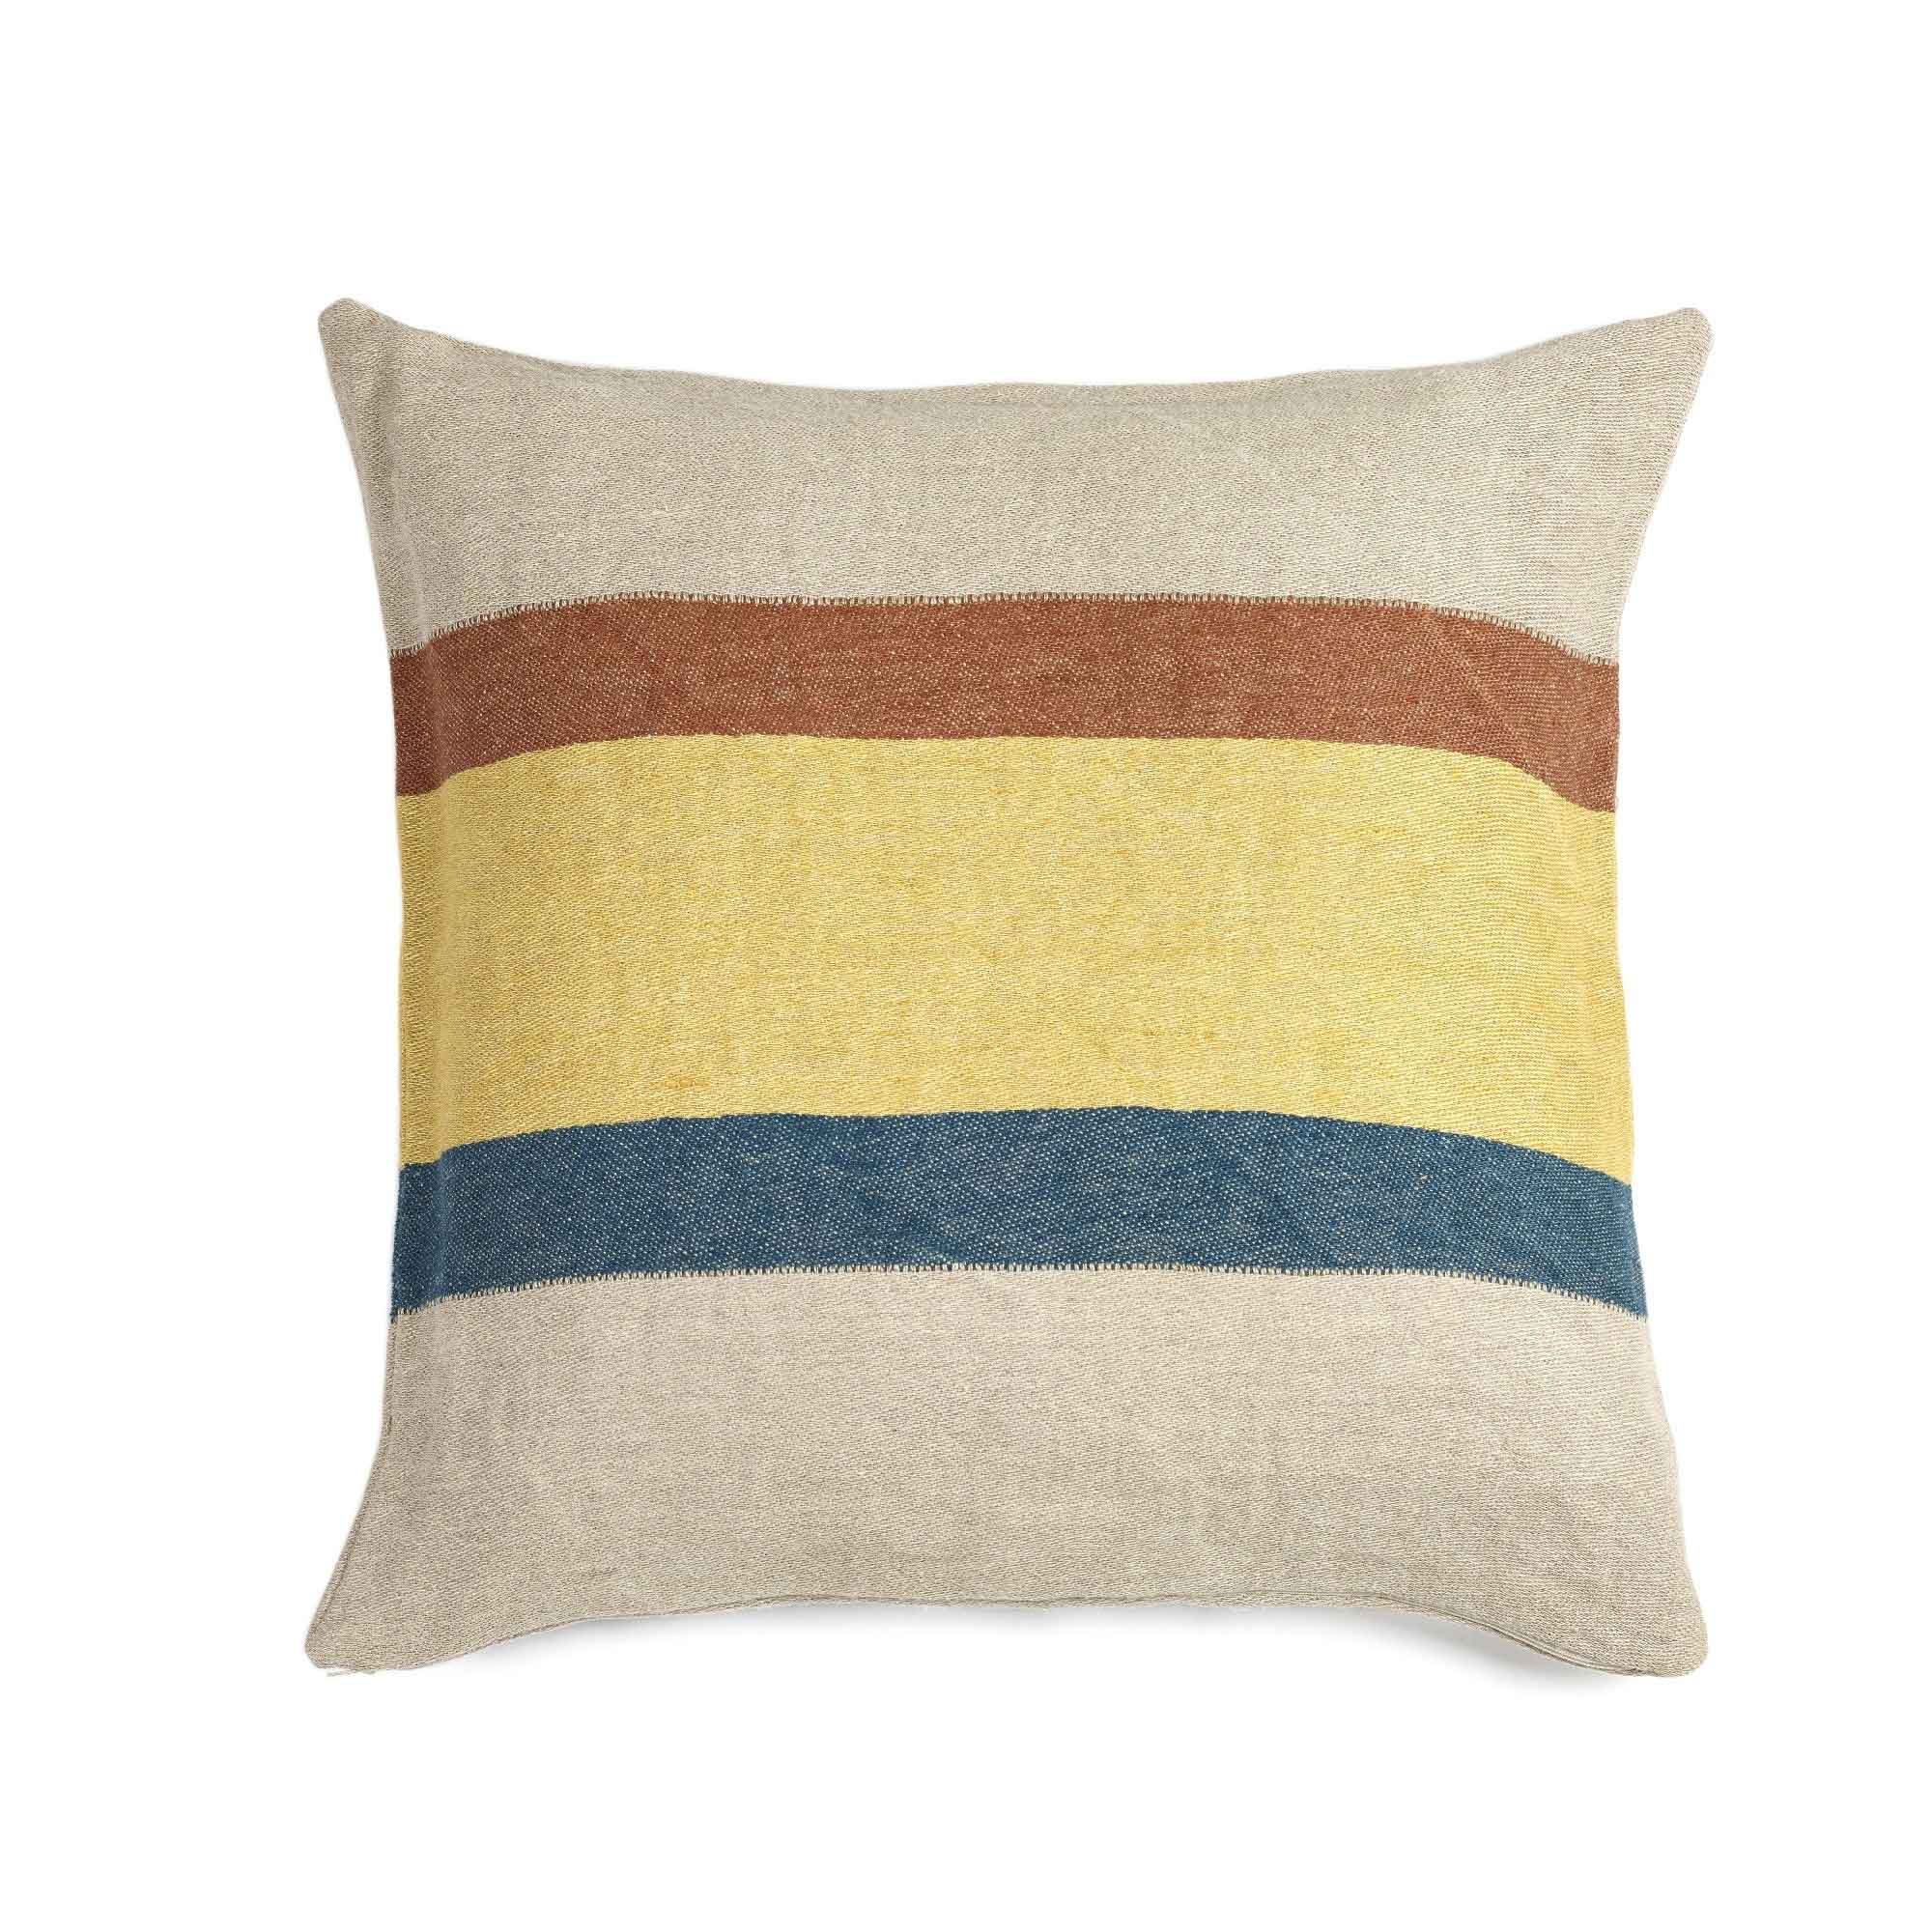 Belgian linen throw pillow cover flat lay product shot in color Mercurio by Libeco for South Hous.